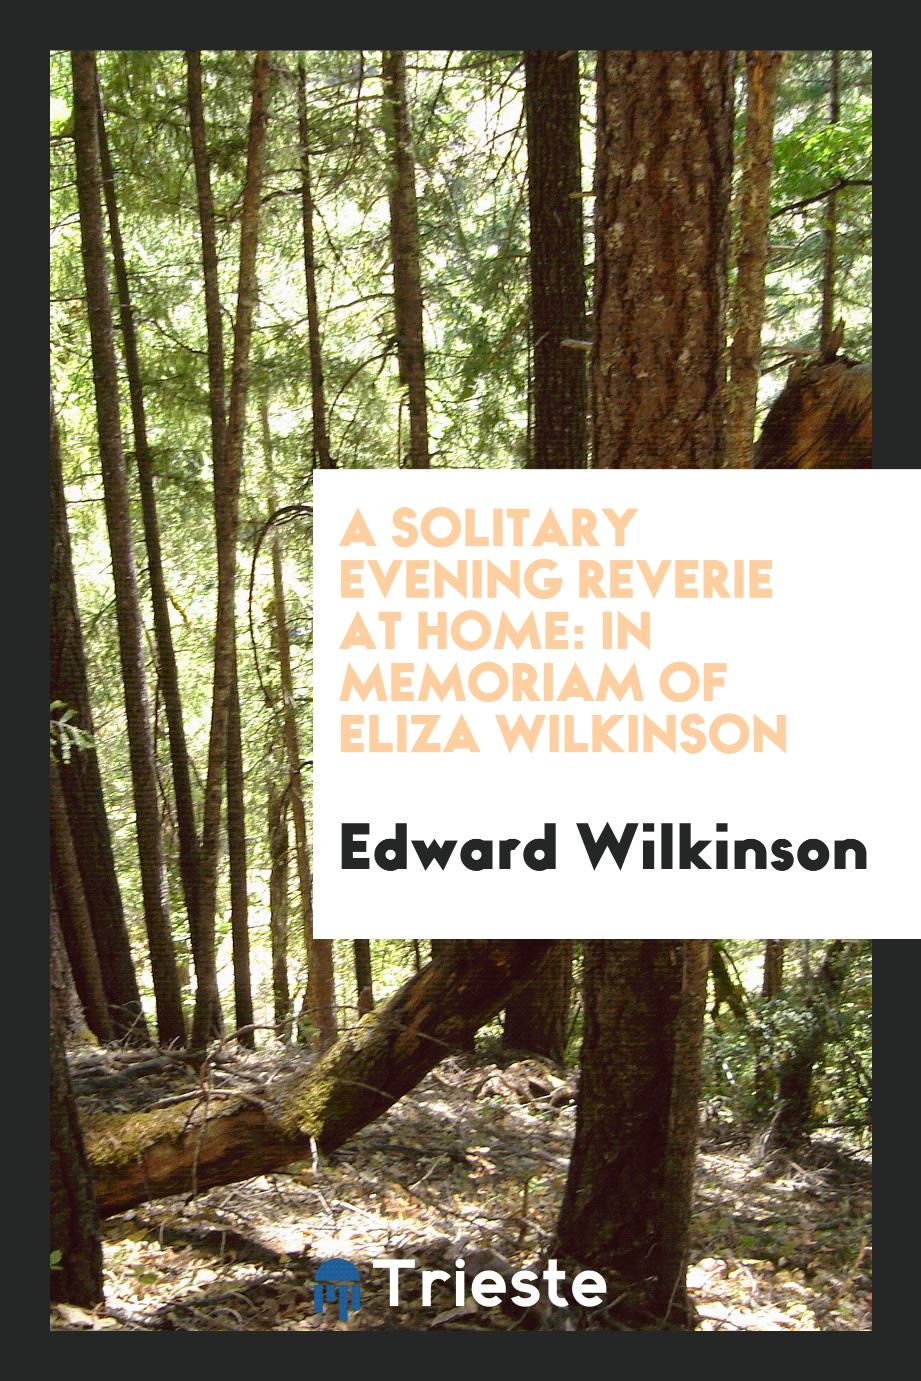 Edward Wilkinson - A Solitary Evening Reverie at Home: In Memoriam of Eliza Wilkinson